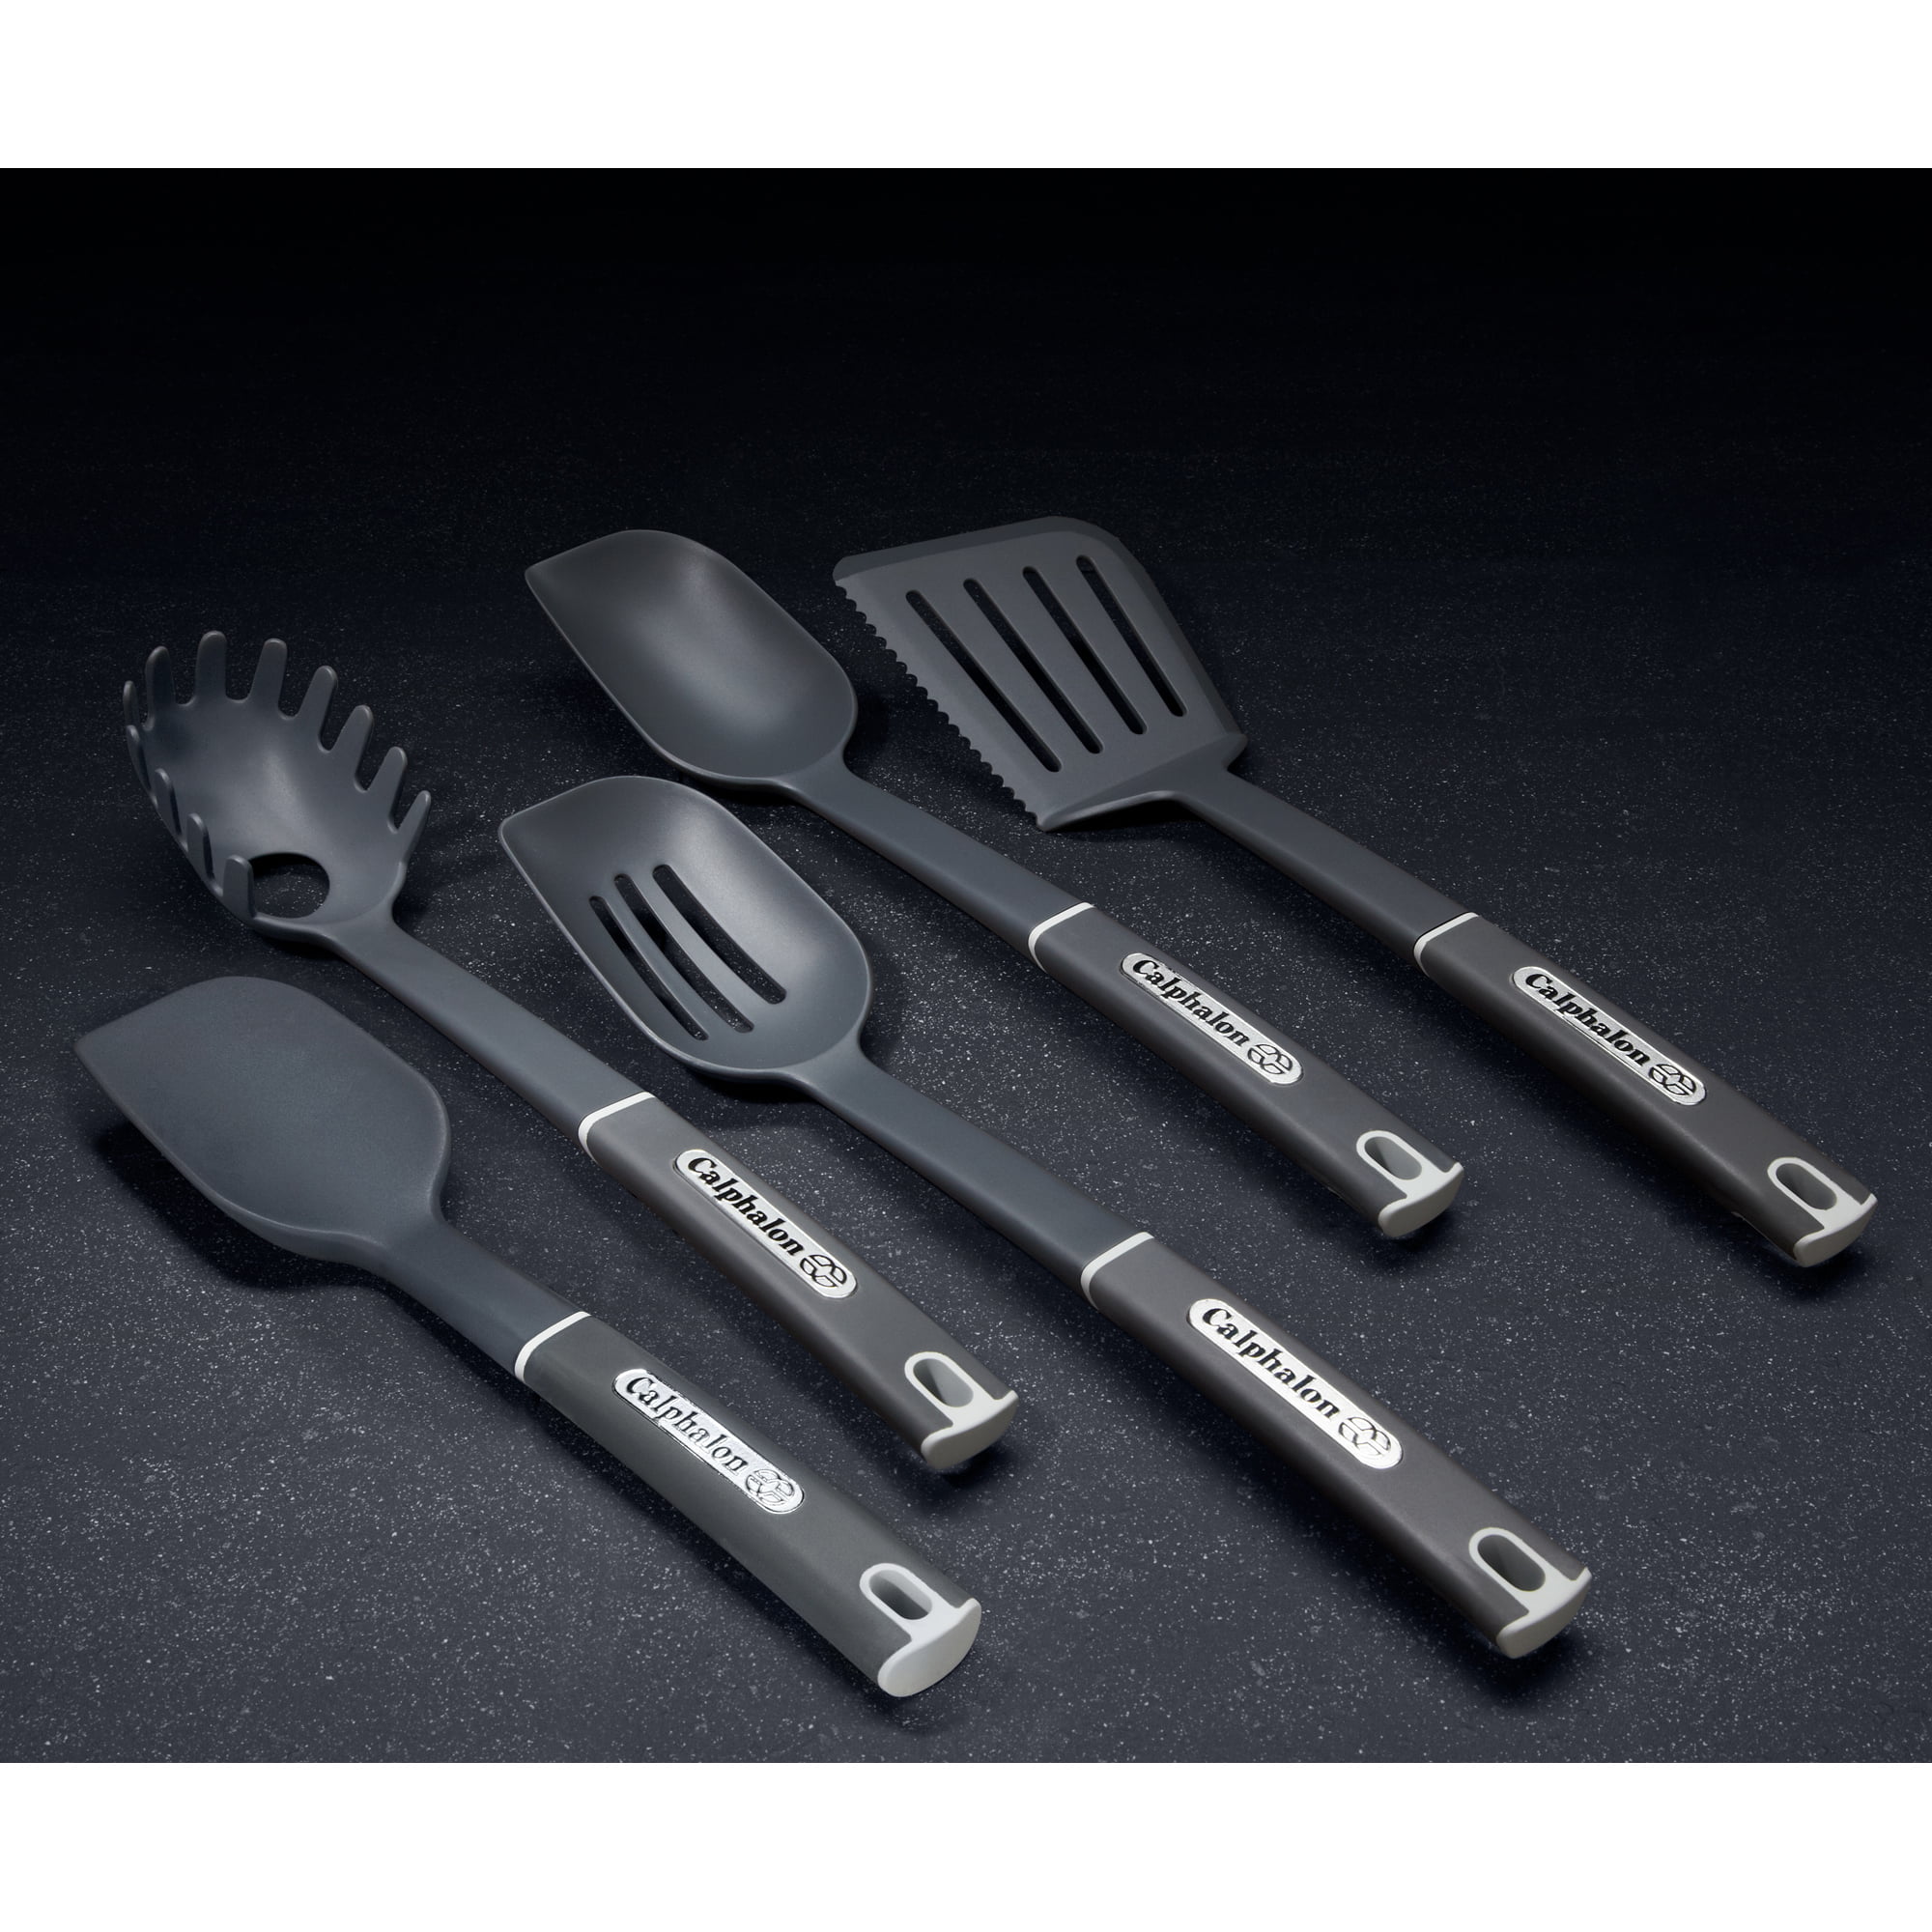 Calphalon 7 piece Utensil Set - household items - by owner